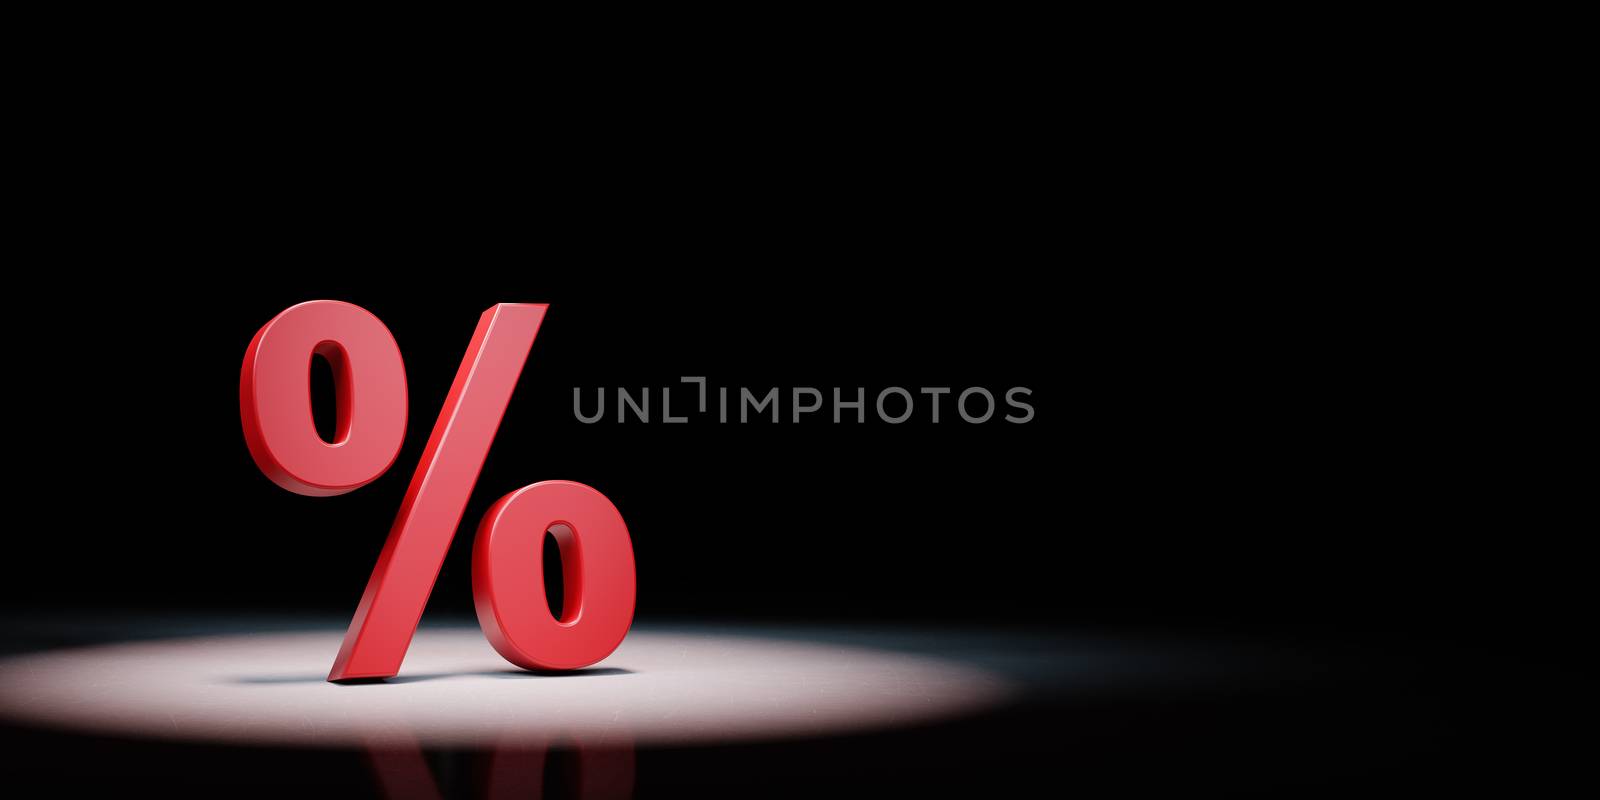 Red Percent Sign Symbol Shape Spotlighted on Black Background with Copy Space 3D Illustration